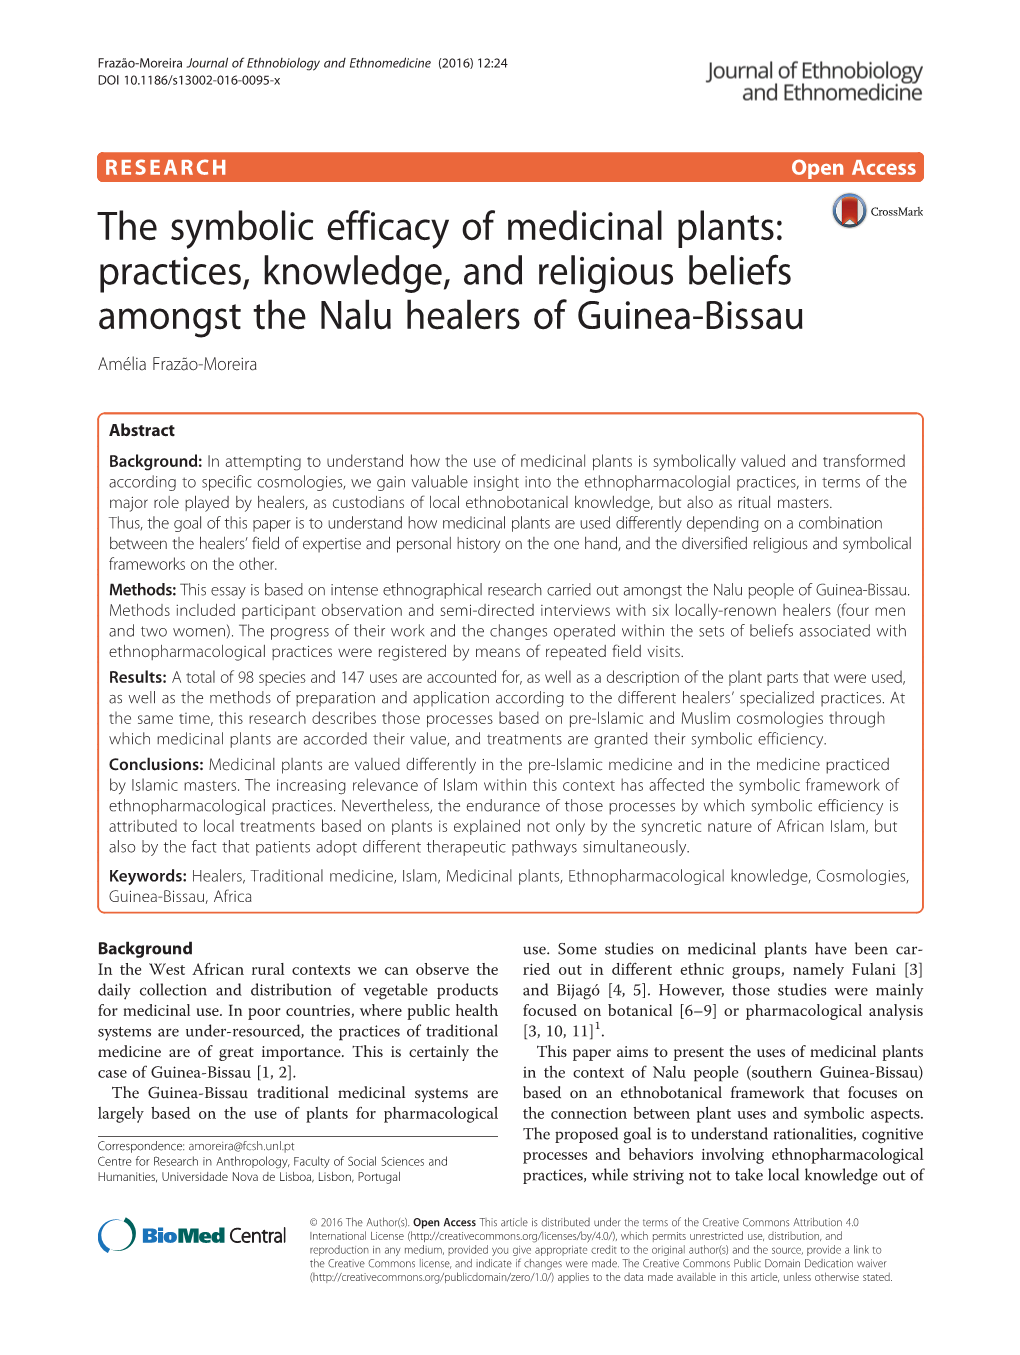 The Symbolic Efficacy of Medicinal Plants: Practices, Knowledge, and Religious Beliefs Amongst the Nalu Healers of Guinea-Bissau Amélia Frazão-Moreira